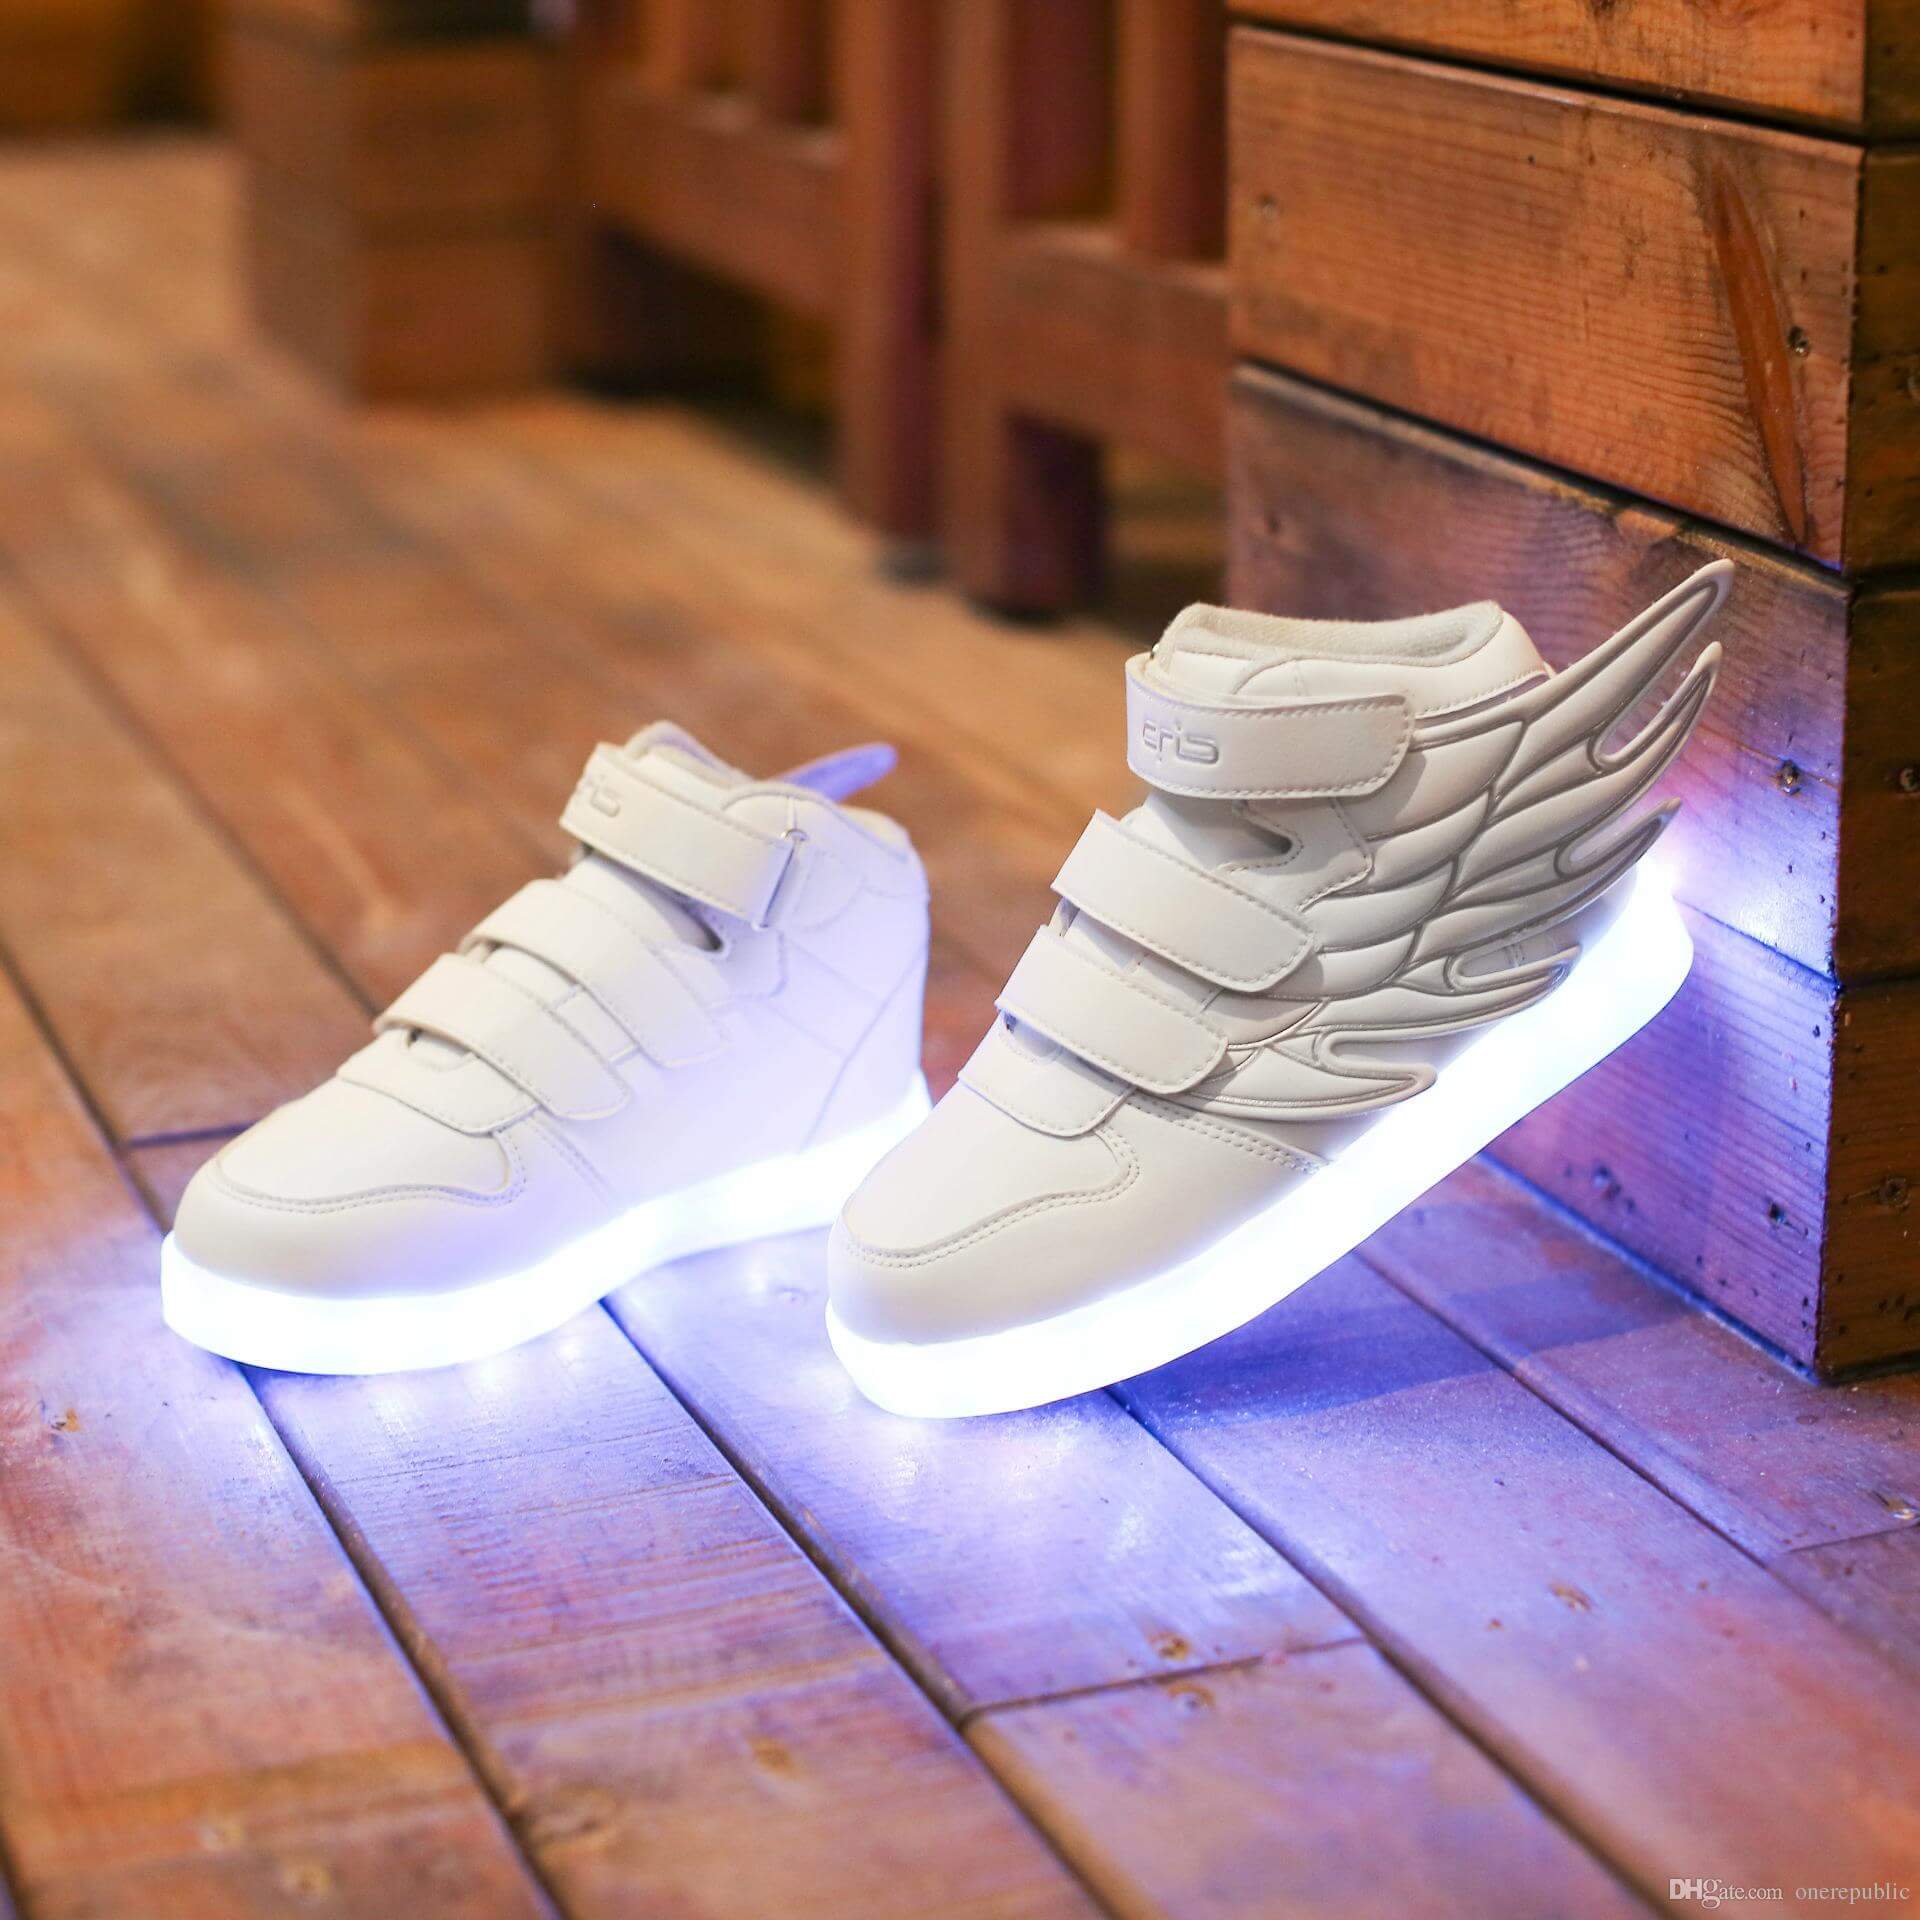 light up shoes for 2 year old